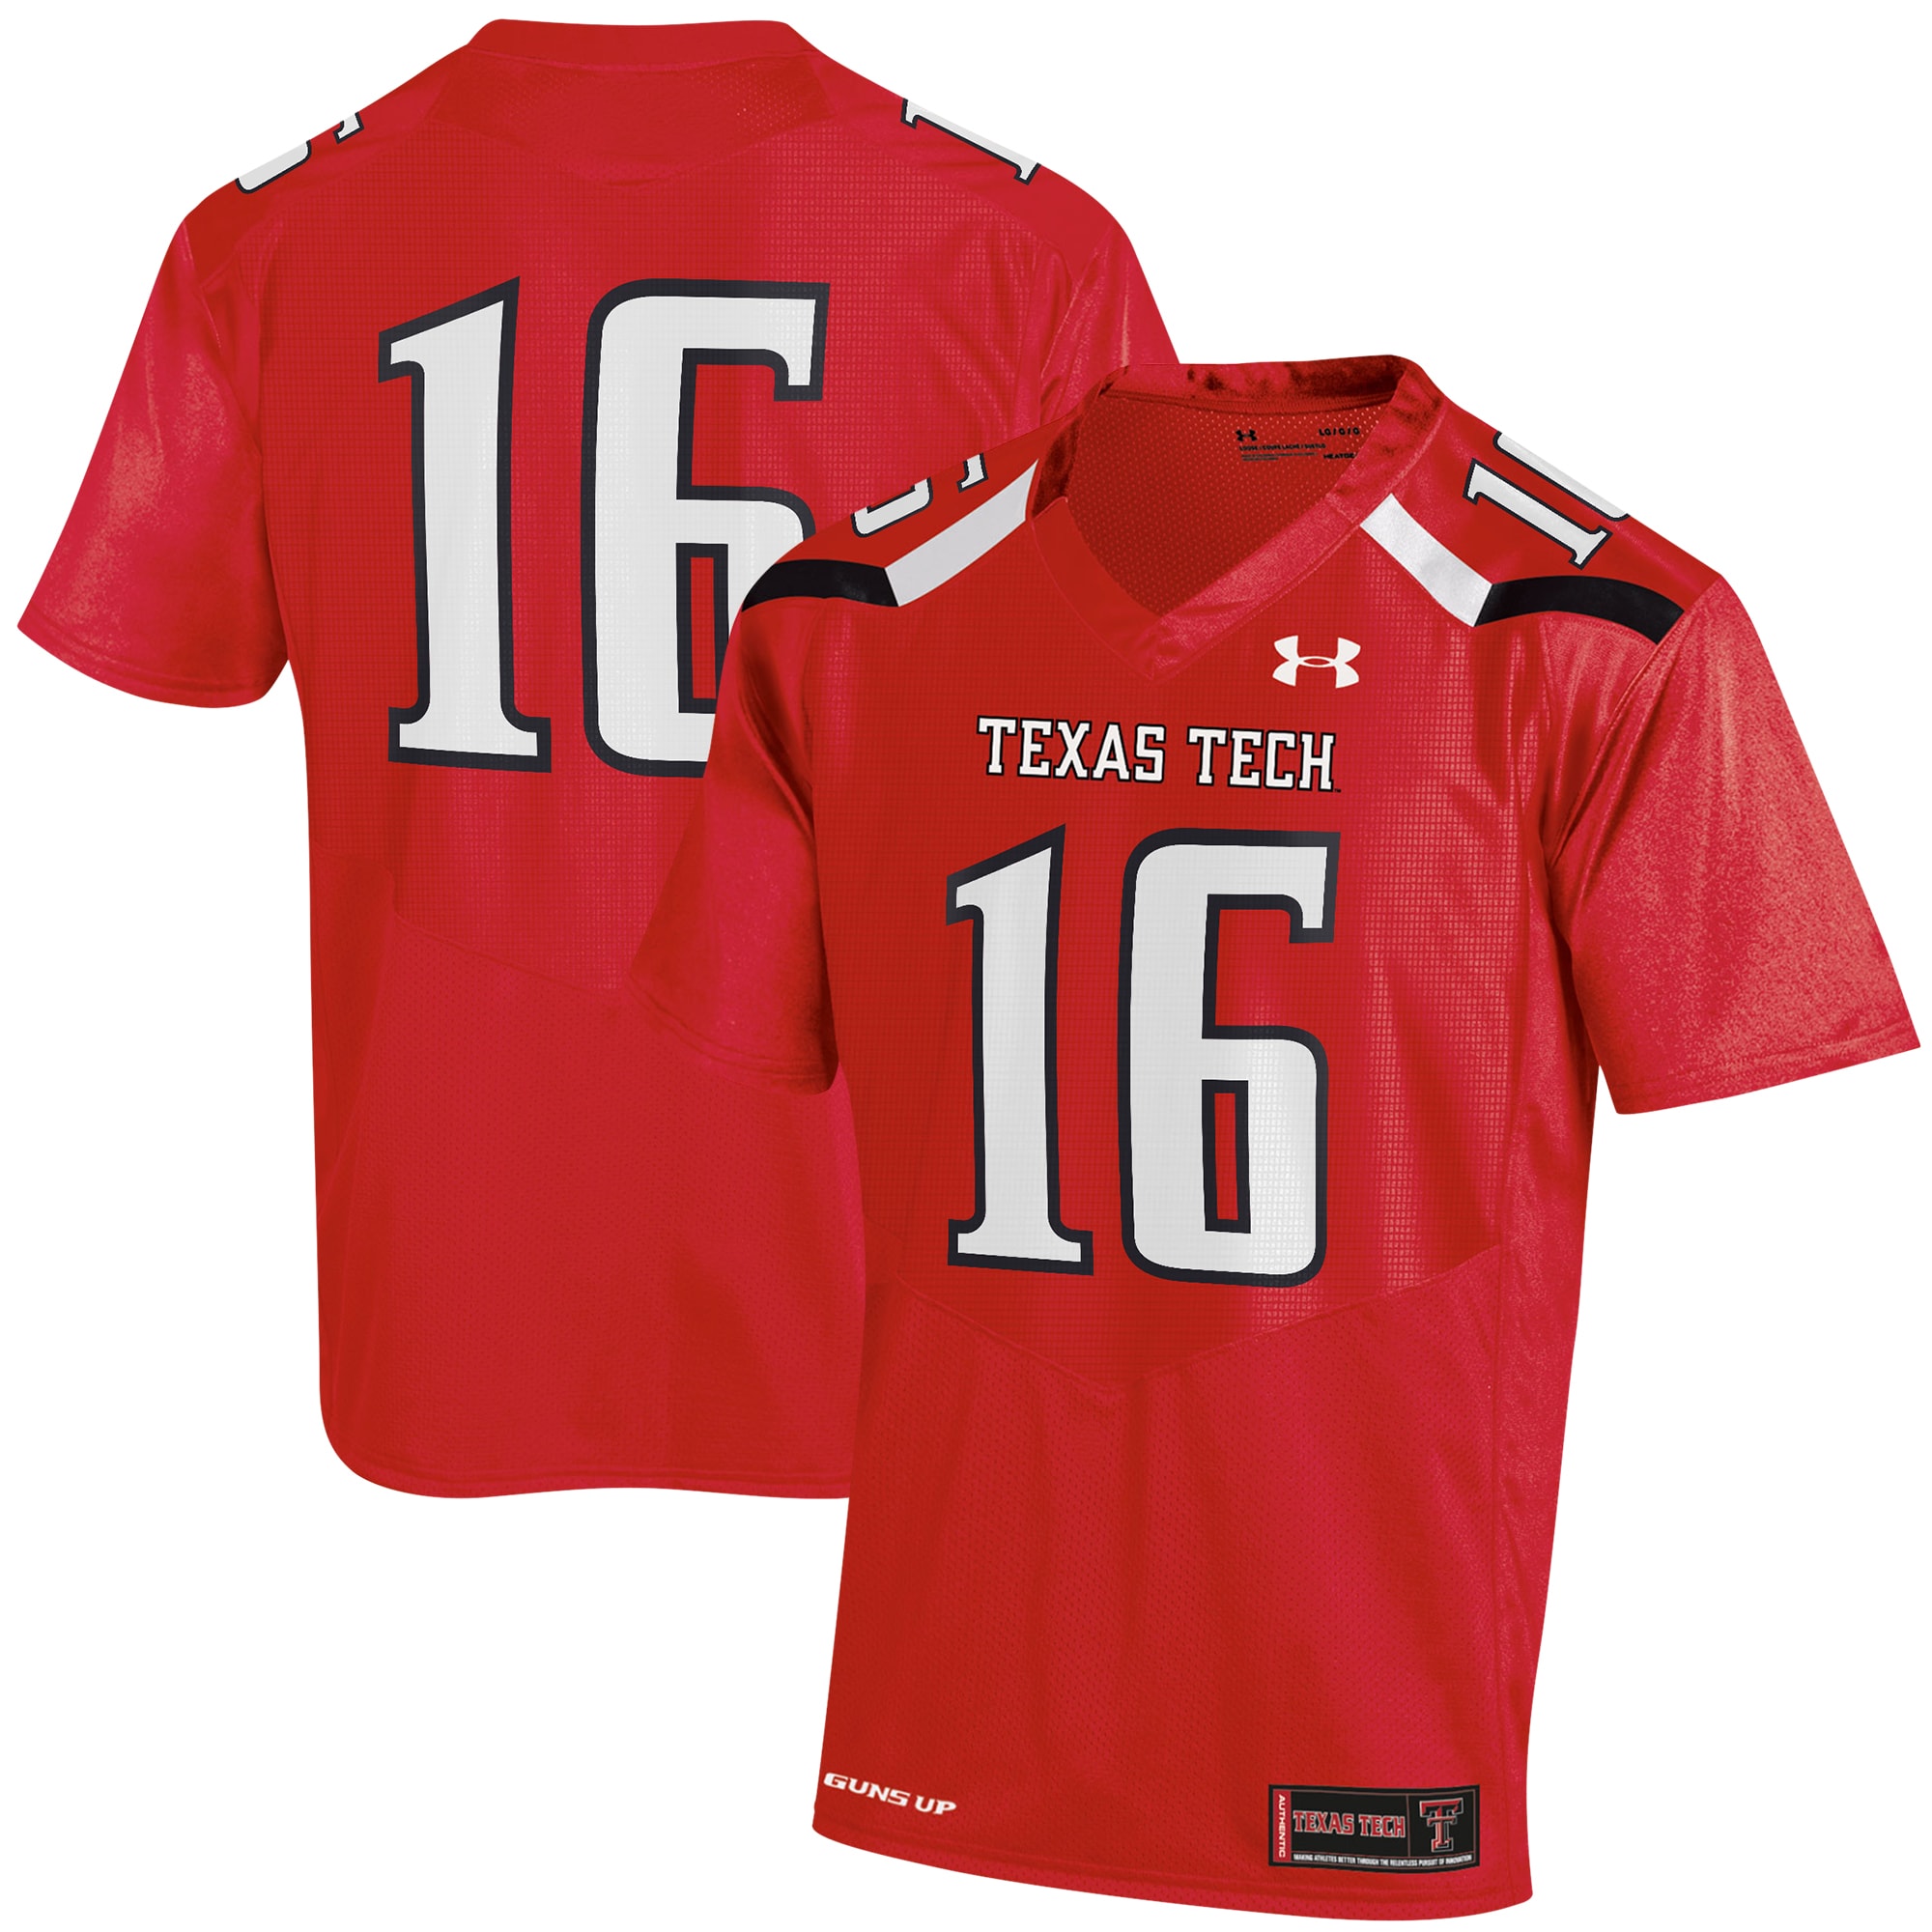 #16 Texas Tech Red Raiders Under Armour Replica Jersey - Red For Youth Women Men